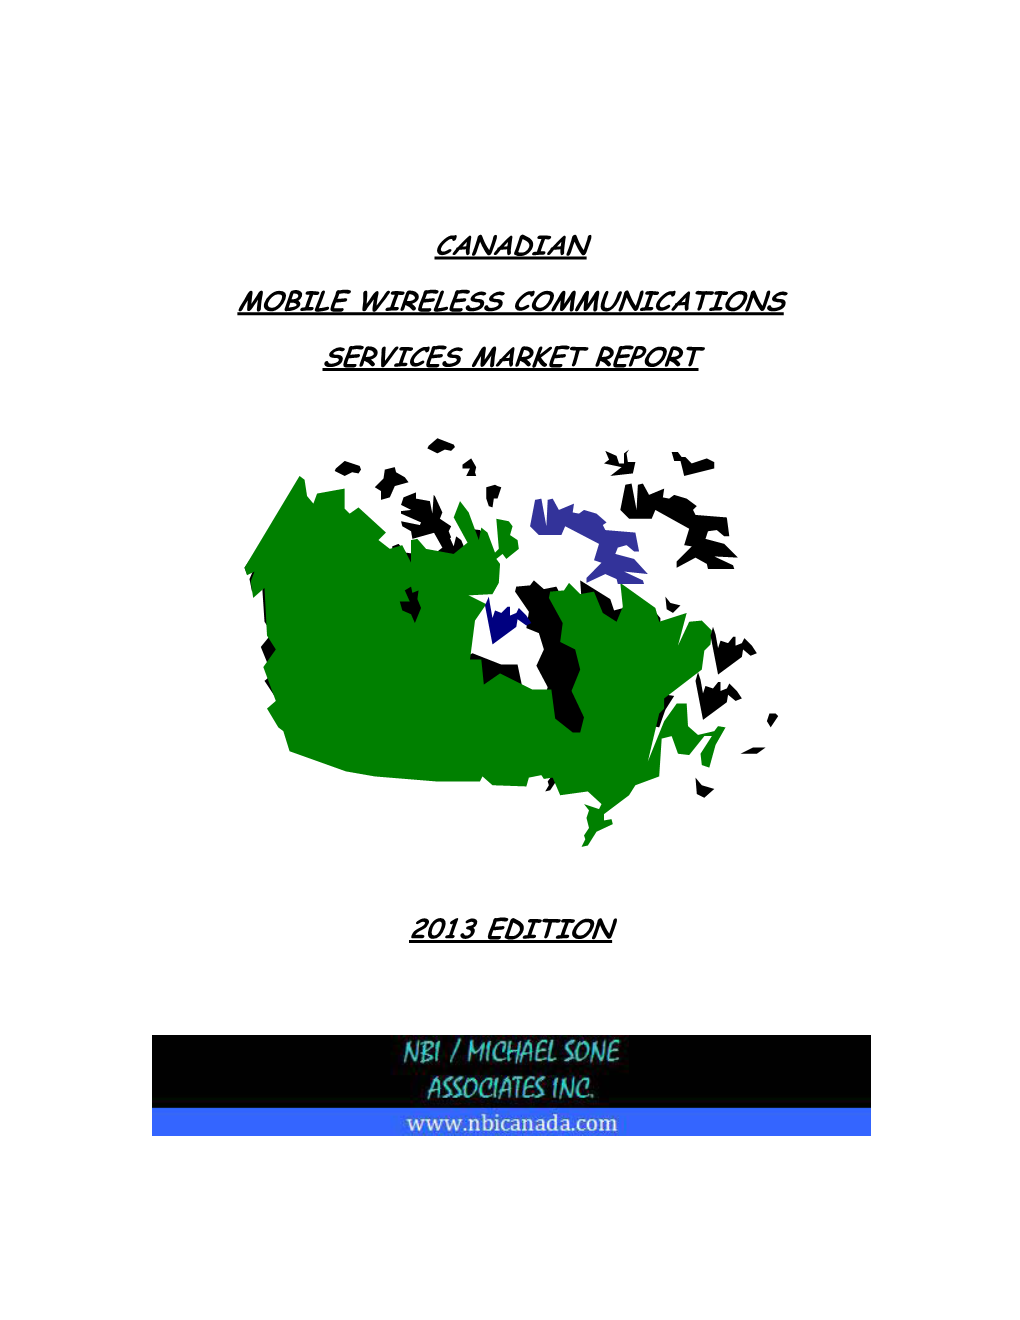 Canadian Mobile Wireless Services Market Report (2013 Edition)